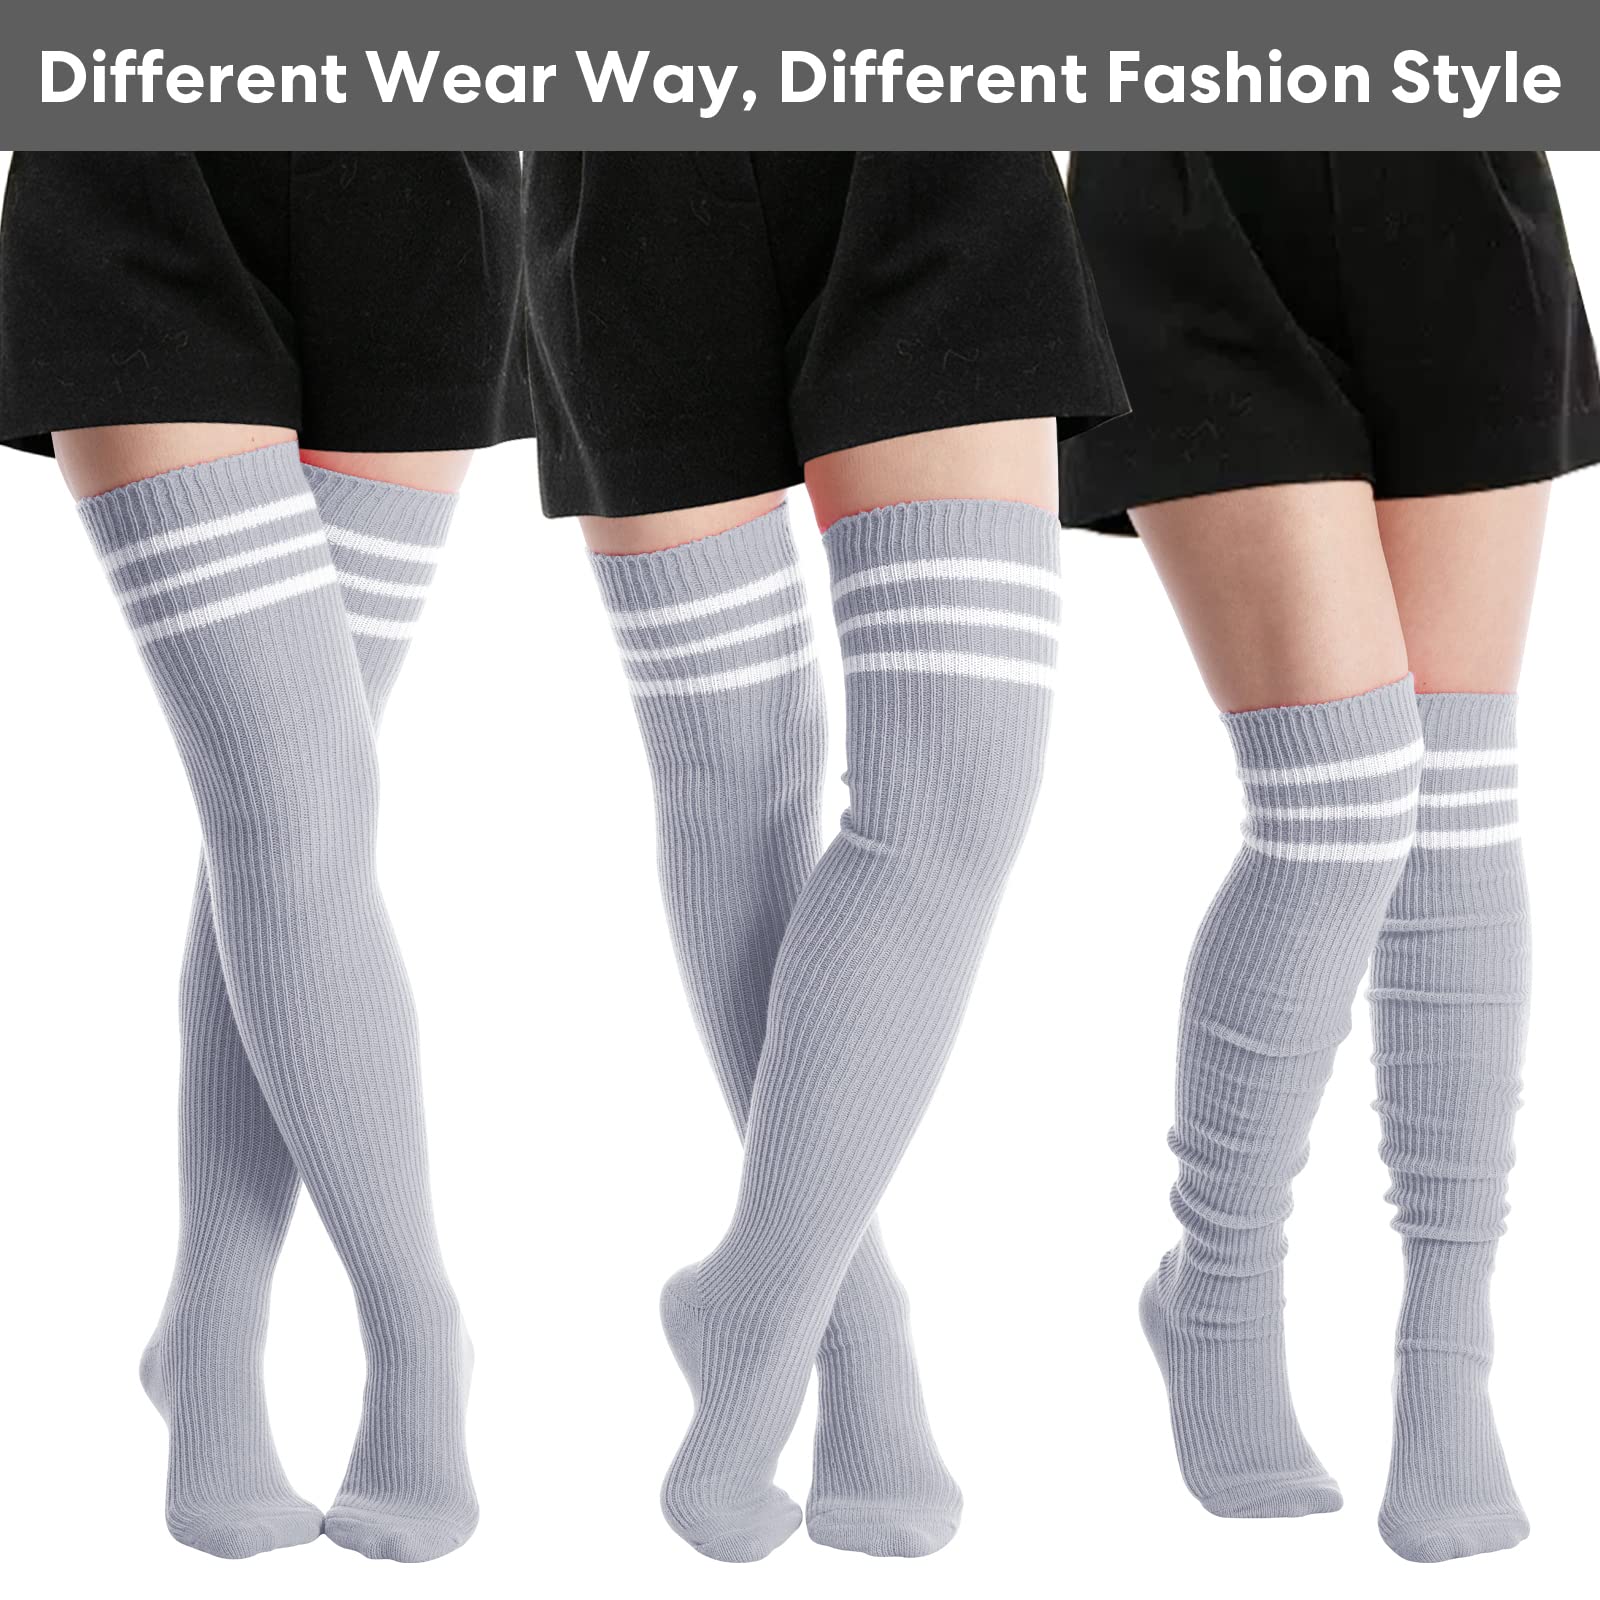 Extra Long Warm Knit Striped Thigh Highs Leg Warmers-Grey & White Striped - Moon Wood